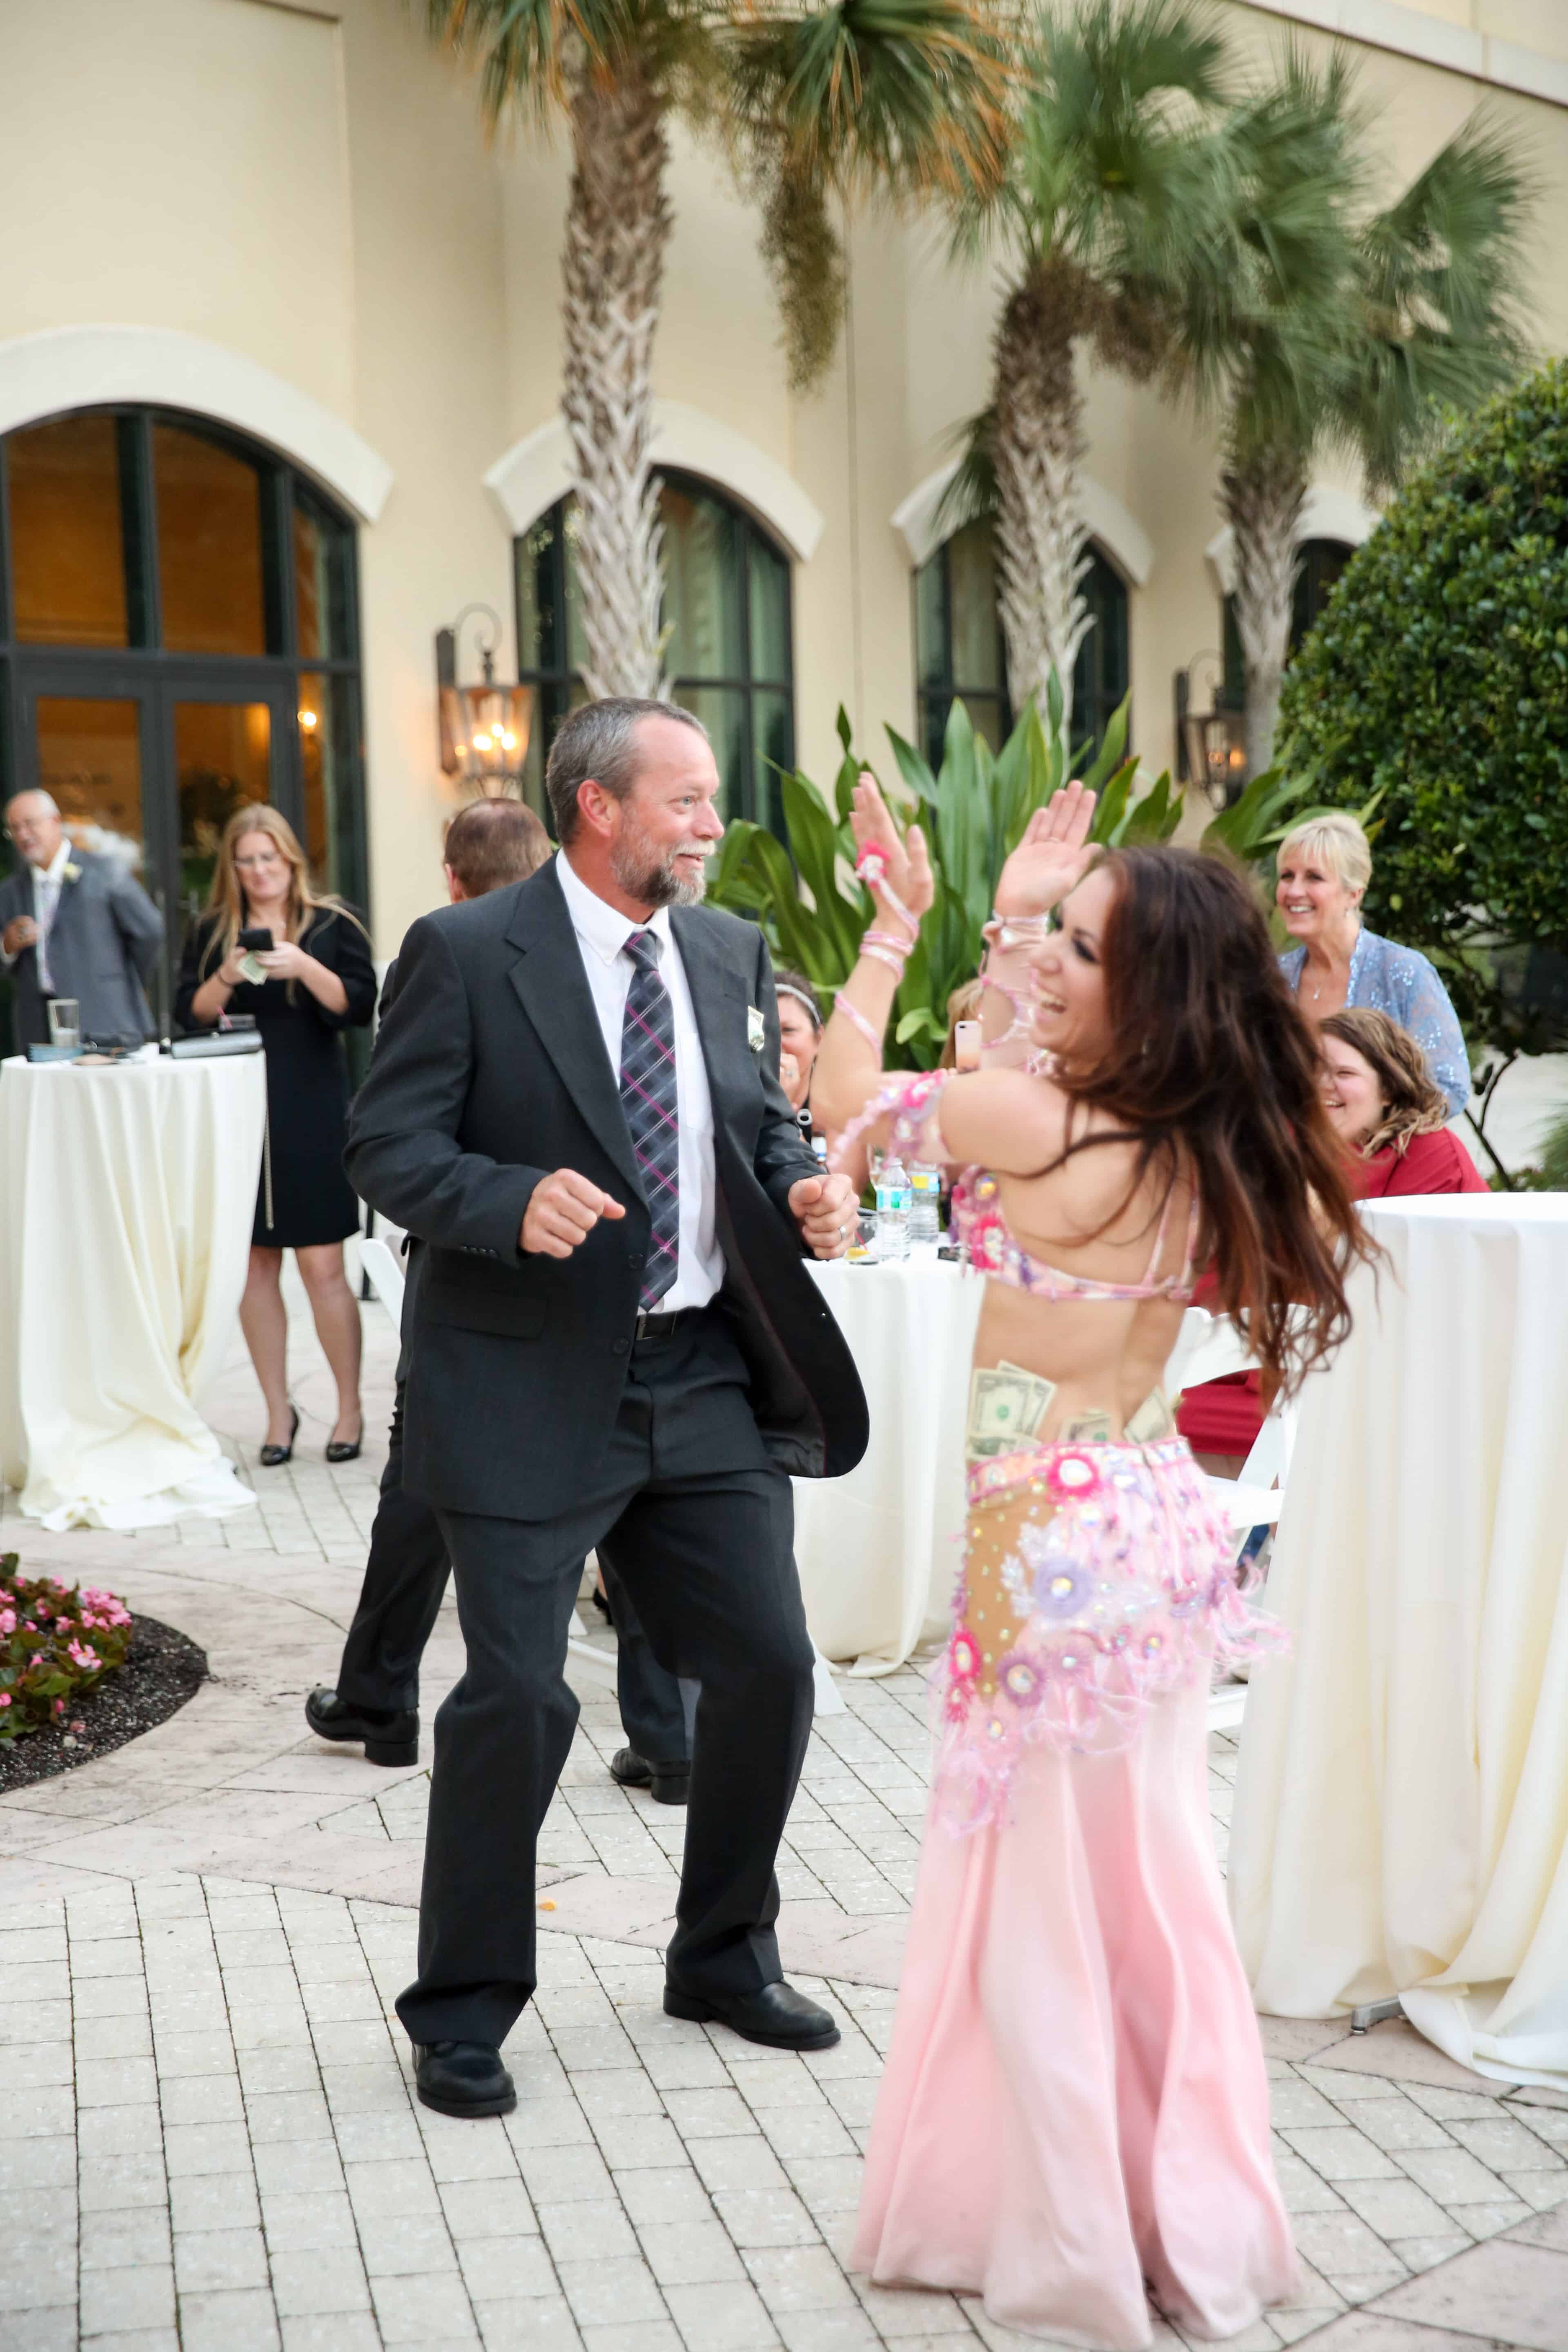 Carrara performs belly dance during the cocktail hour at an LGBT wedding at Omni Championsgate. Photo by LiveHappy Studio